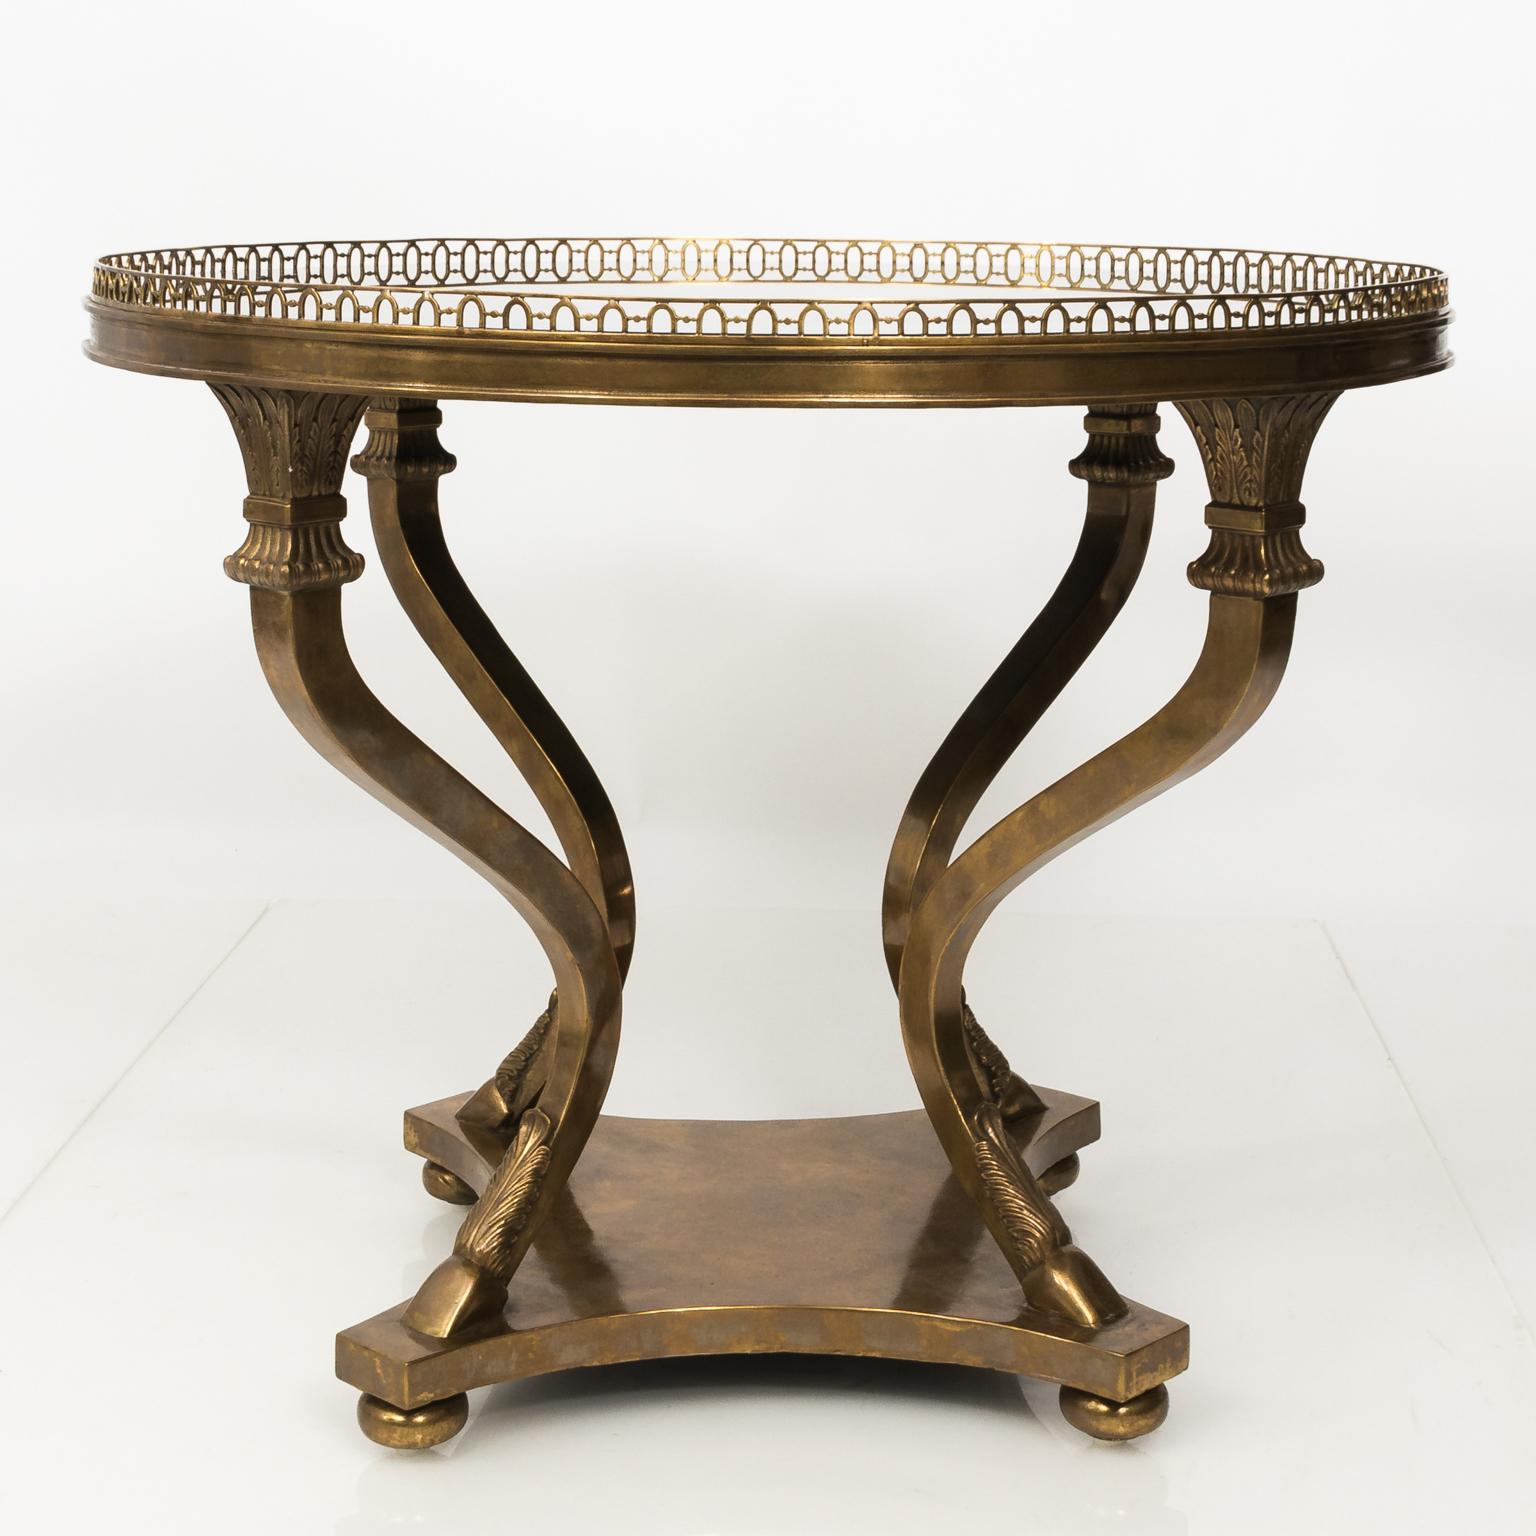 Neoclassical style bronze centre table in shape of a large guerdon with antiqued mirror top and bronze pierced gallery. Base consists of a cabriole four legged support finished with hoof and waterleaf leaf shaped feet.
  